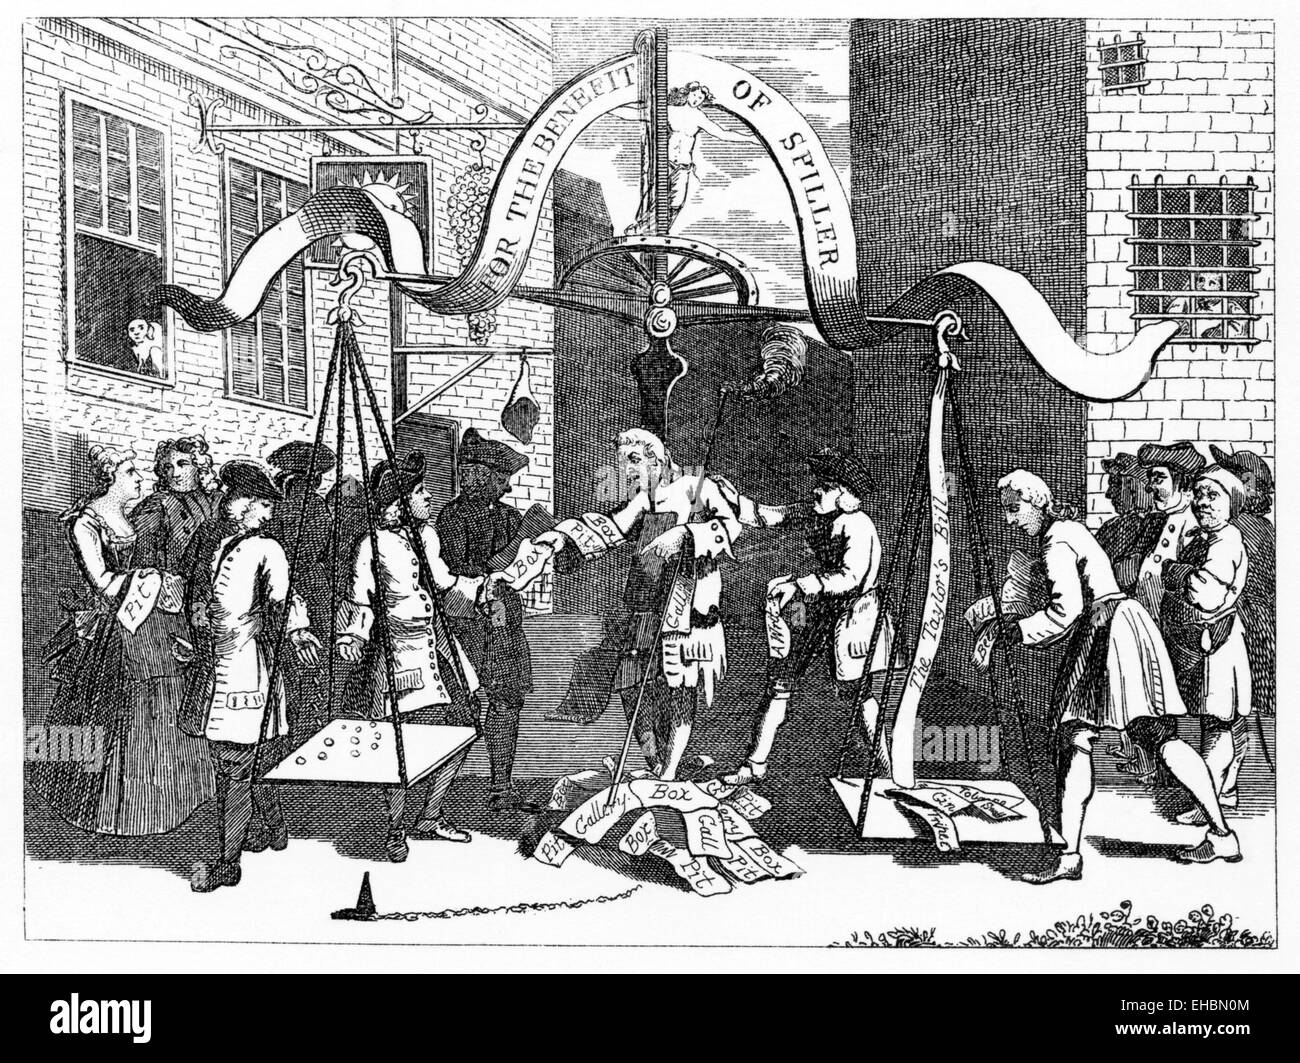 For The Benefit of Spiller, an engraving by William Hogarth in 1728, depicting the actor James Spiller trying to raise money outside debtors prison. Stock Photo